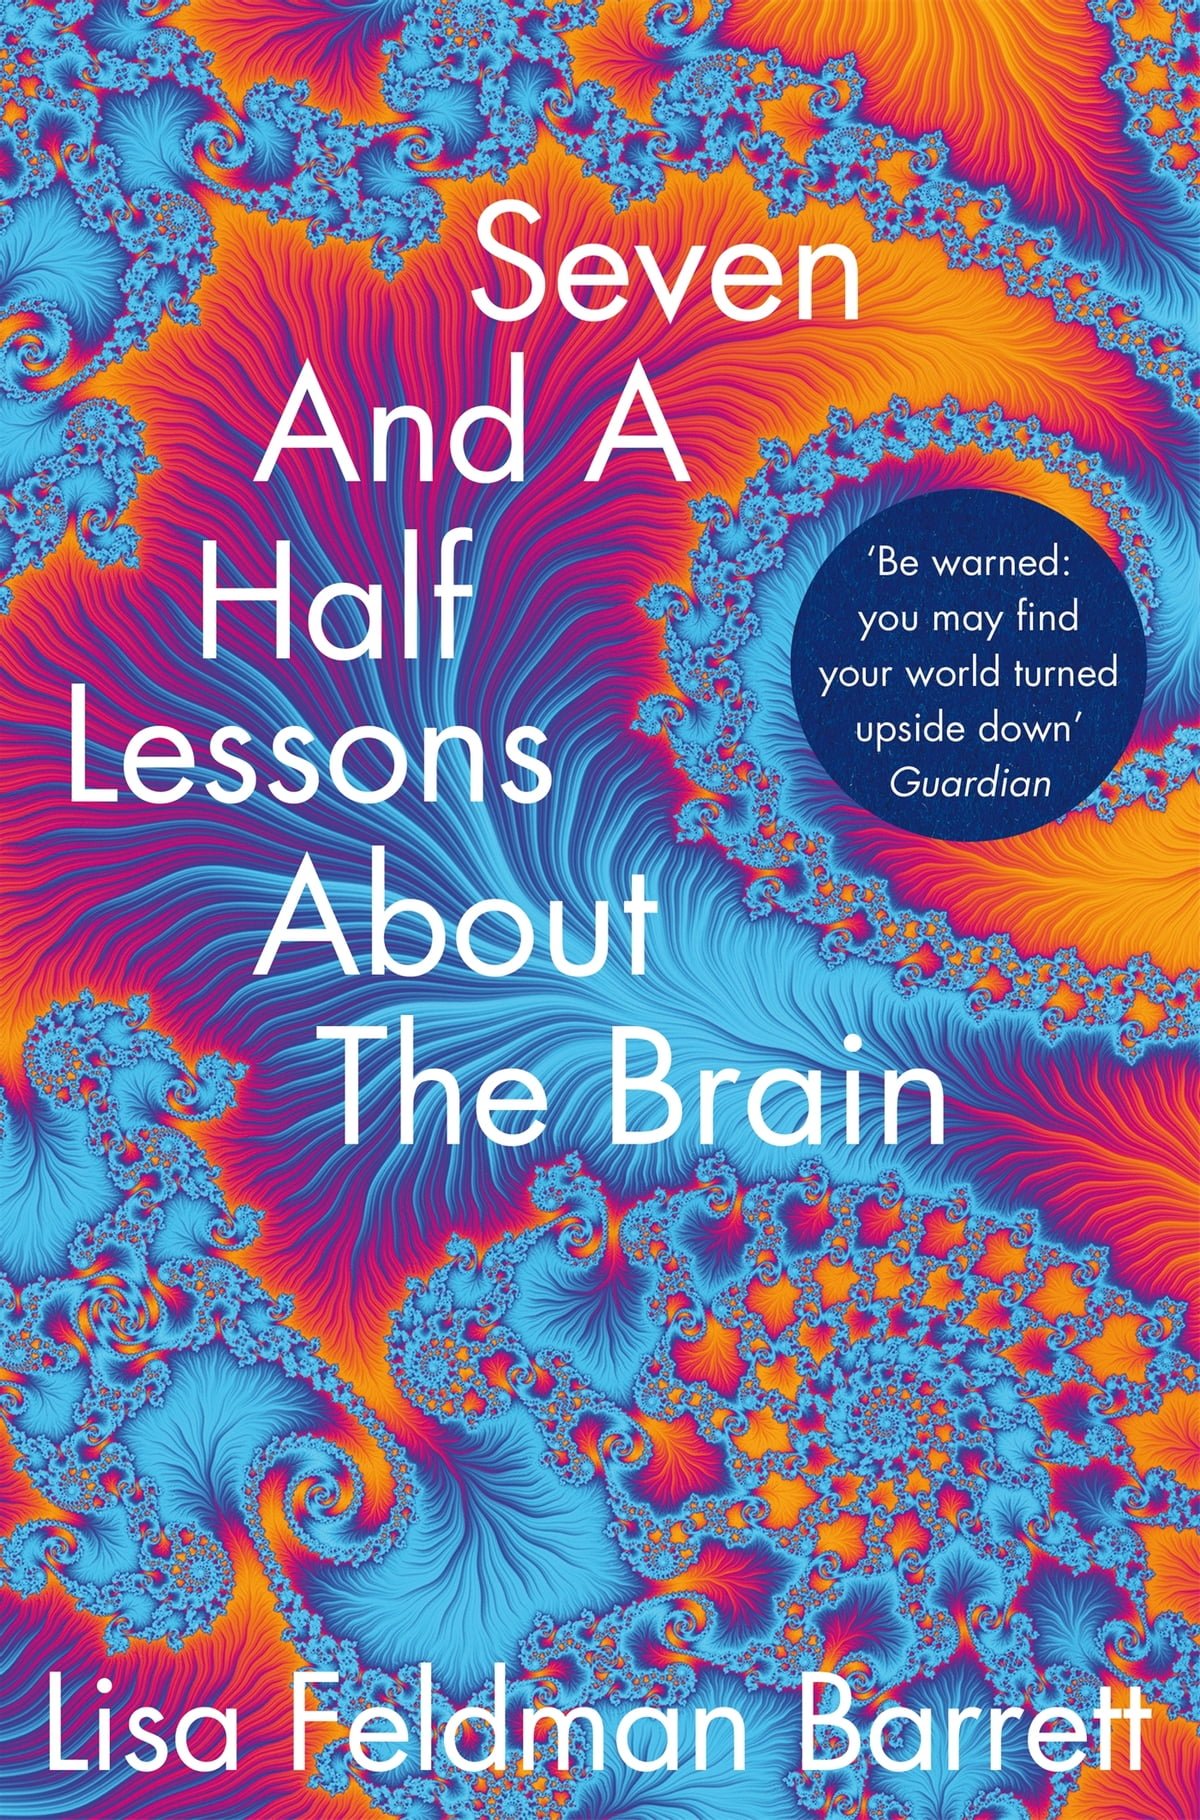 seven-and-a-half-lessons-about-the-brain-1.jpg